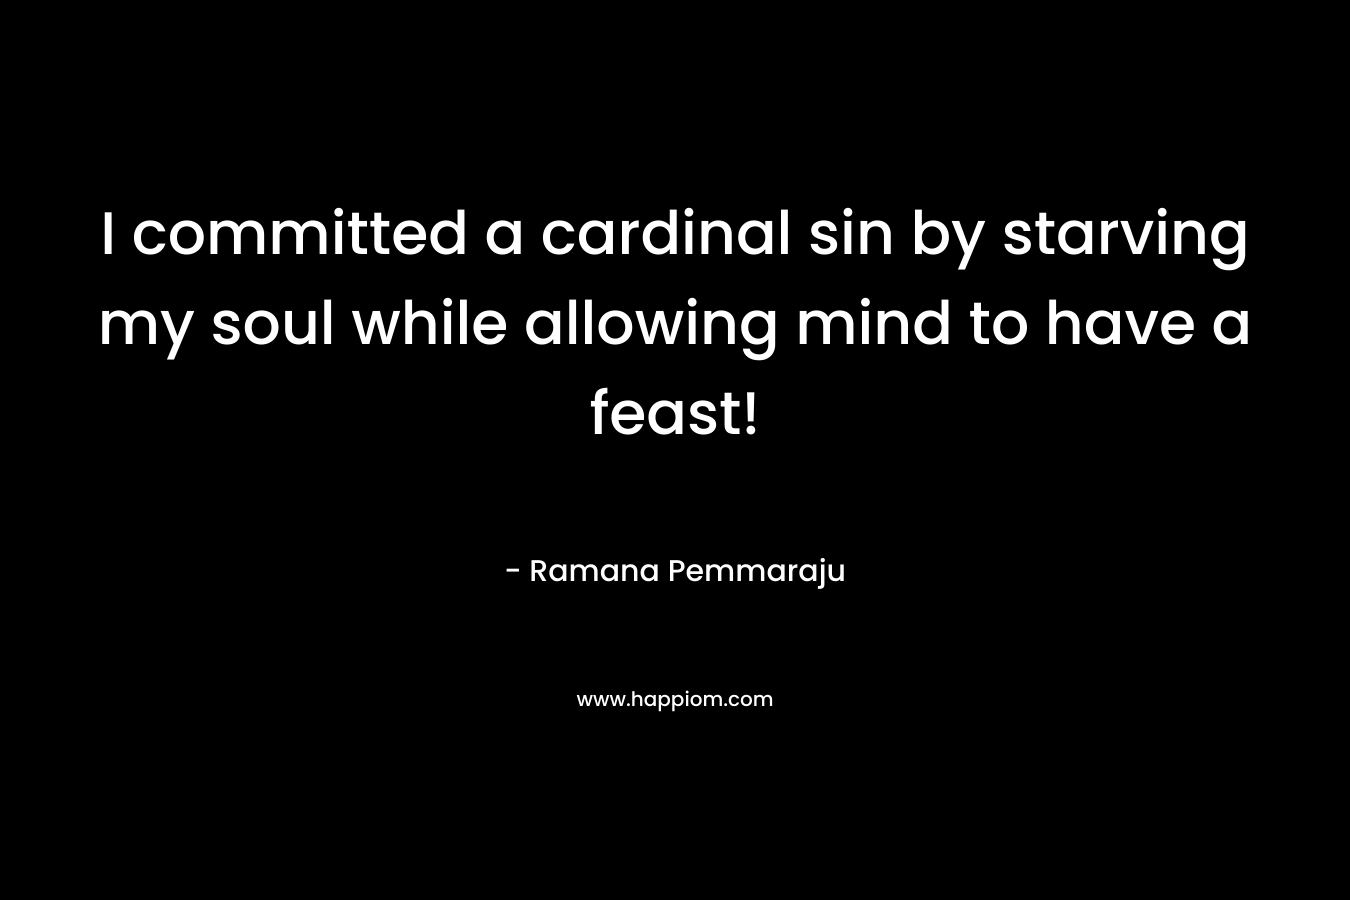 I committed a cardinal sin by starving my soul while allowing mind to have a feast!